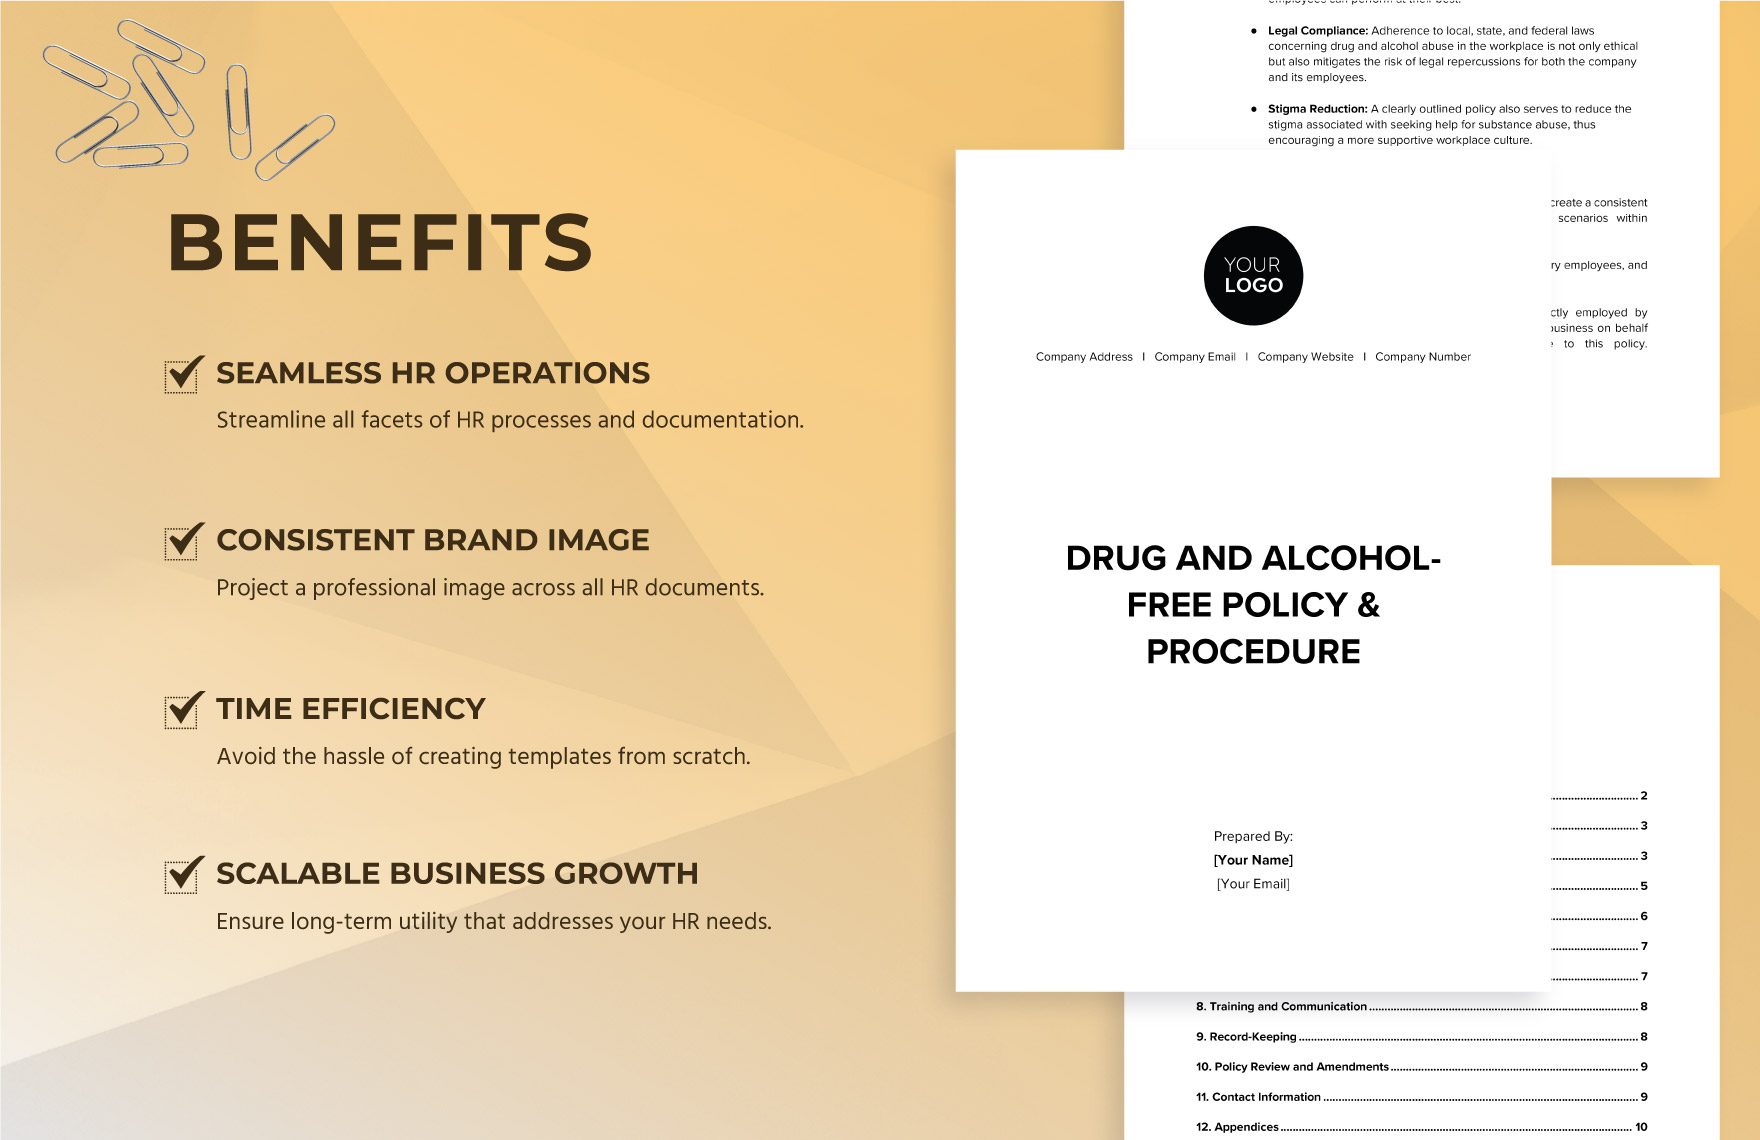 Drug and Alcohol-Free Workplace Policy & Procedure HR Template